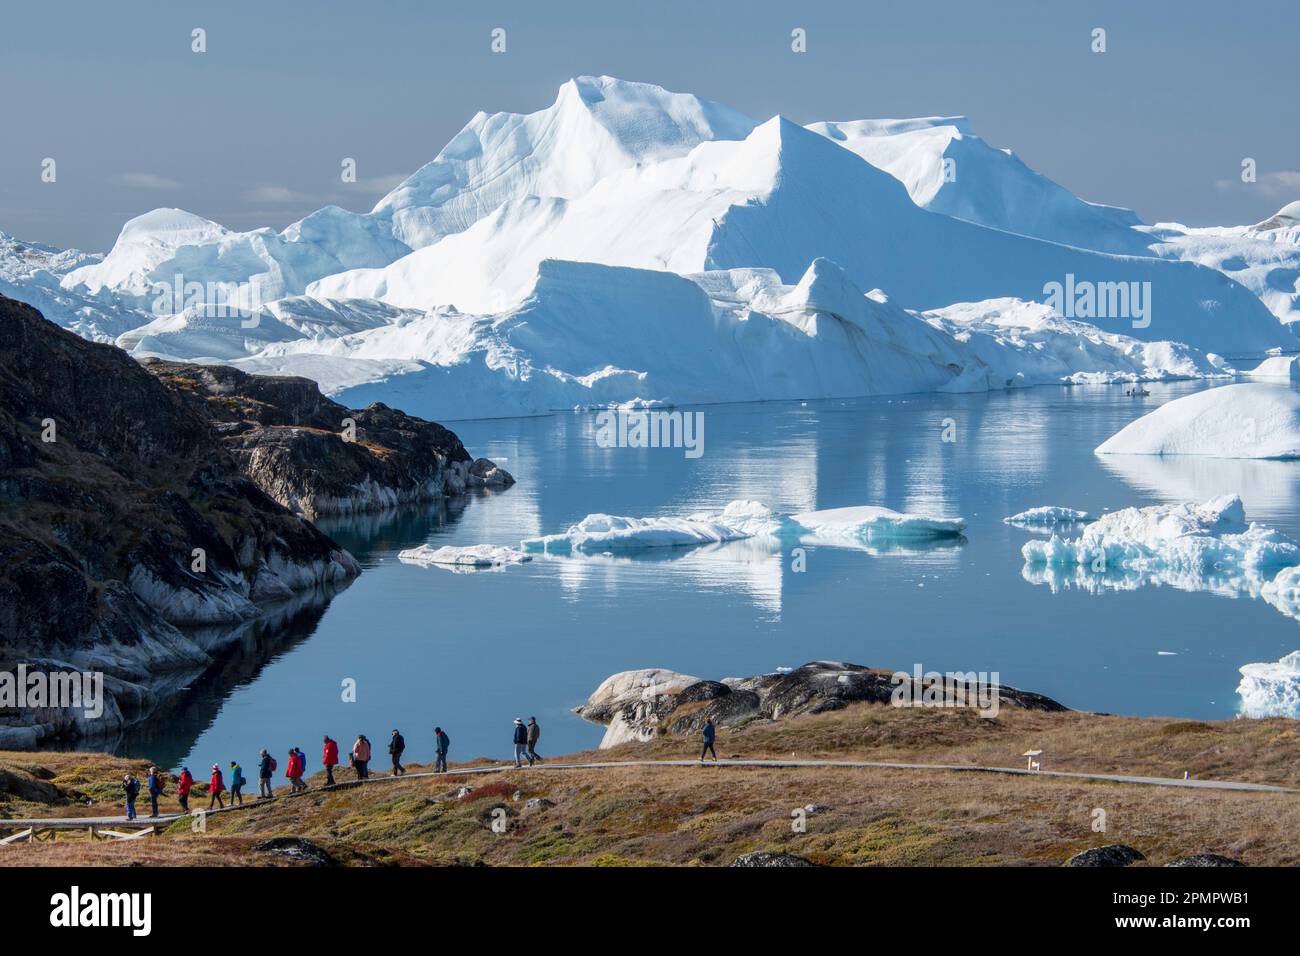 The boardwalk to an overlook to view the icebergs of Sermeq Kujalleq glacier and Disko Bay. Stock Photo